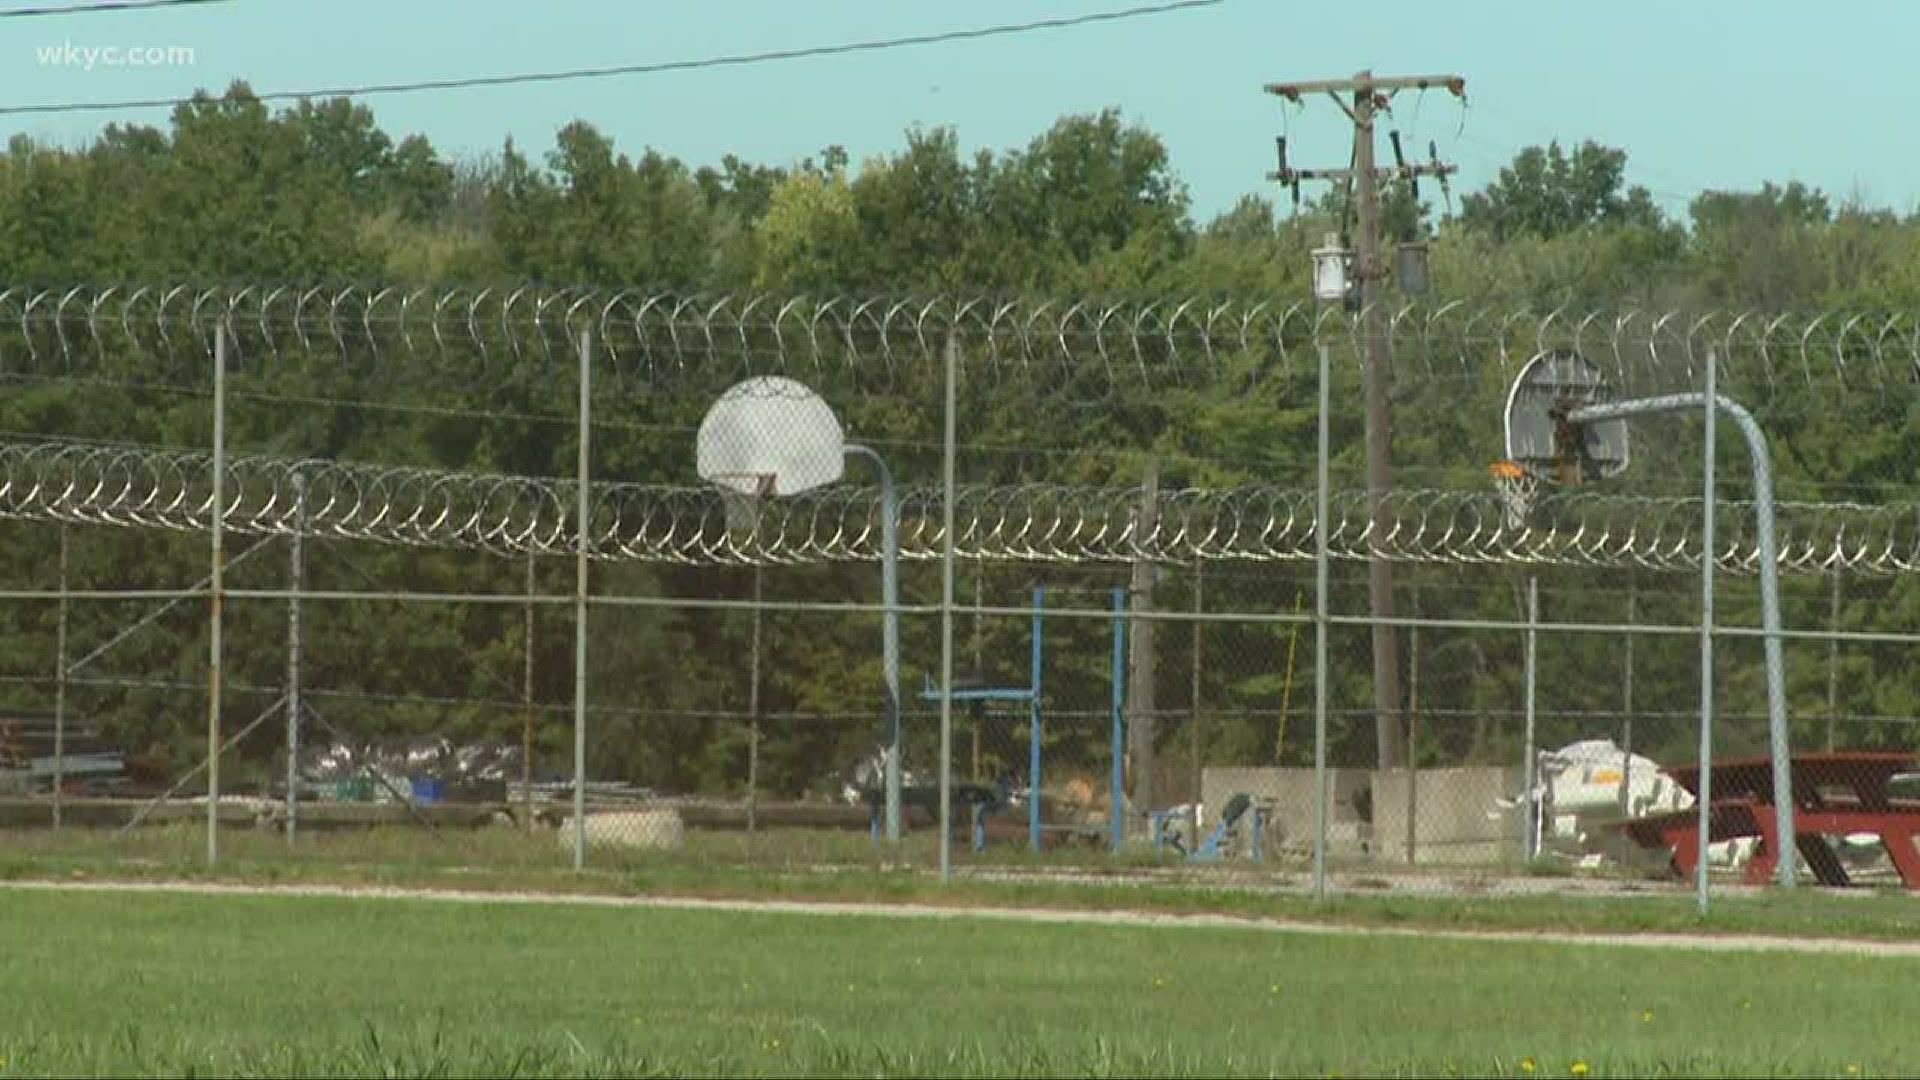 The list of “medically vulnerable” inmates at Elkton, that could be released because of the COVID19 outbreak, was released Thursday. Rachel Polansky reports.